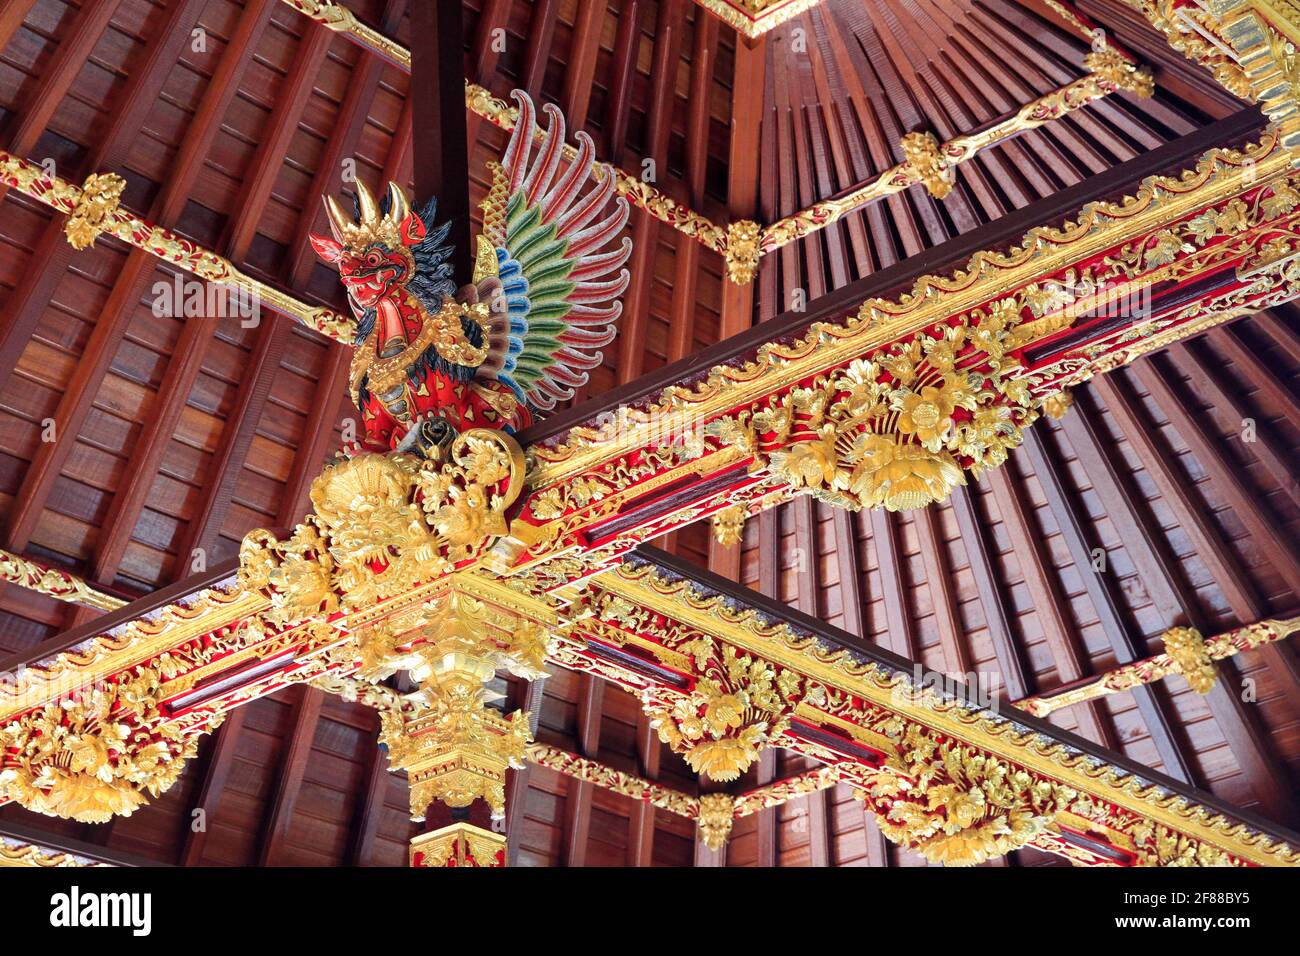 Traditional red wood decoration of roof inside building with carved dragon and gold detail in Bali, Indonesia Stock Photo